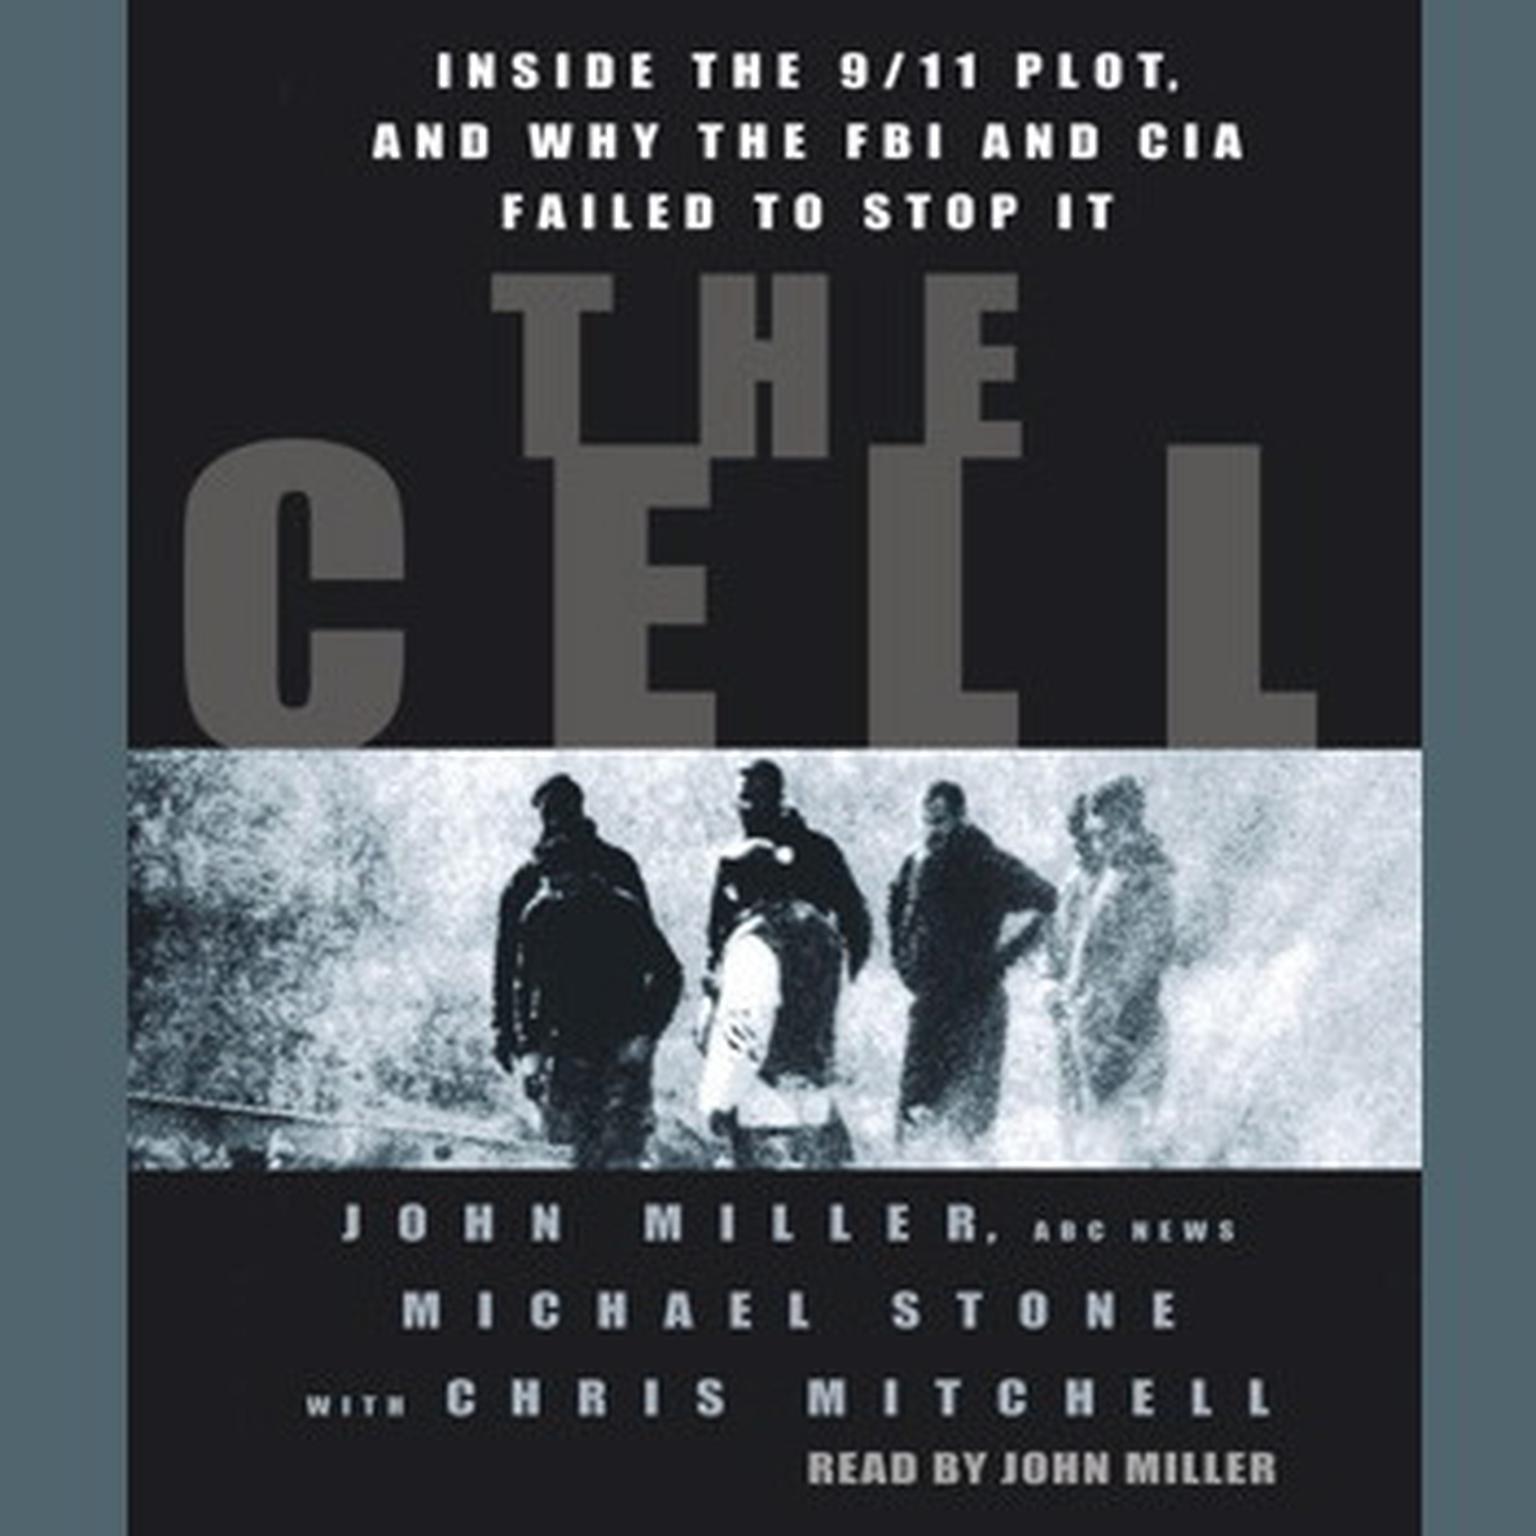 The Cell (Abridged): Inside the 9/11 Plot, and Why the FBI and CIA Failed to Stop it Audiobook, by John Miller